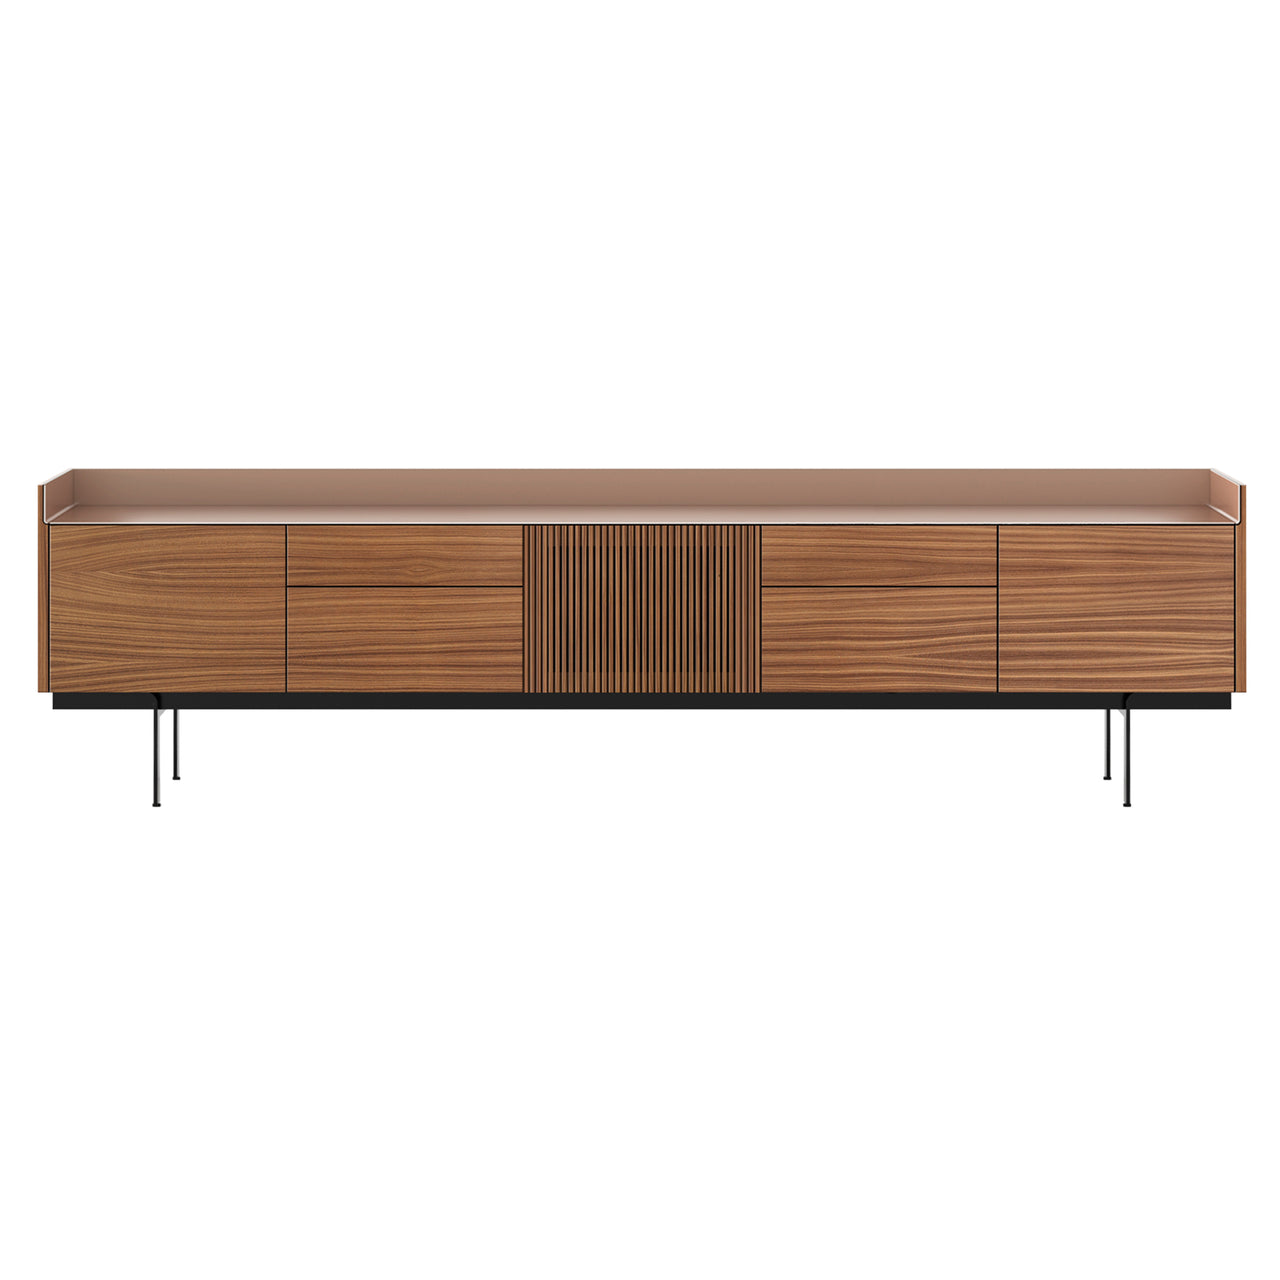 Stockholm Technic Sideboard: STH505 + Walnut Stained Walnut + Anodized Aluminum Pale Rose + Black